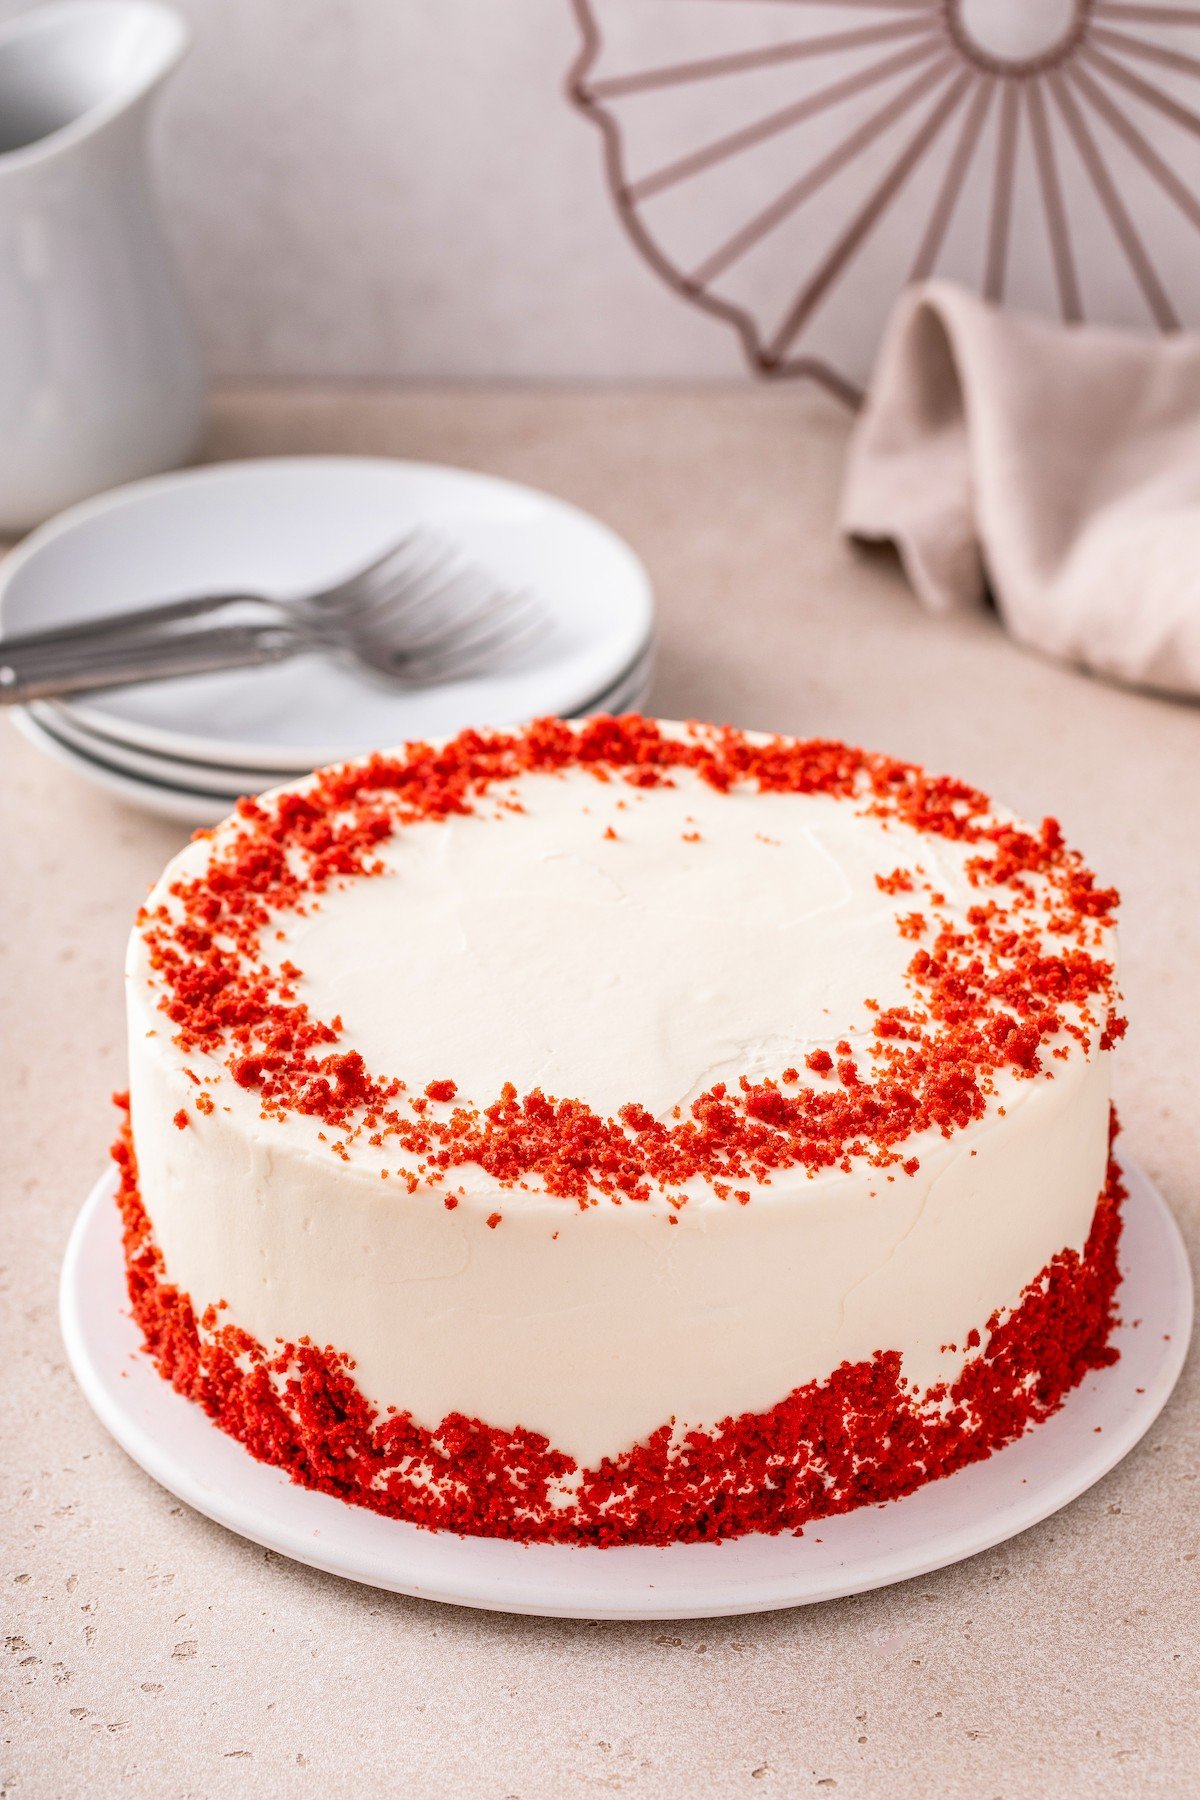 A red velvet cake frosted with cream cheese frosting, decorated with cake crumbs.